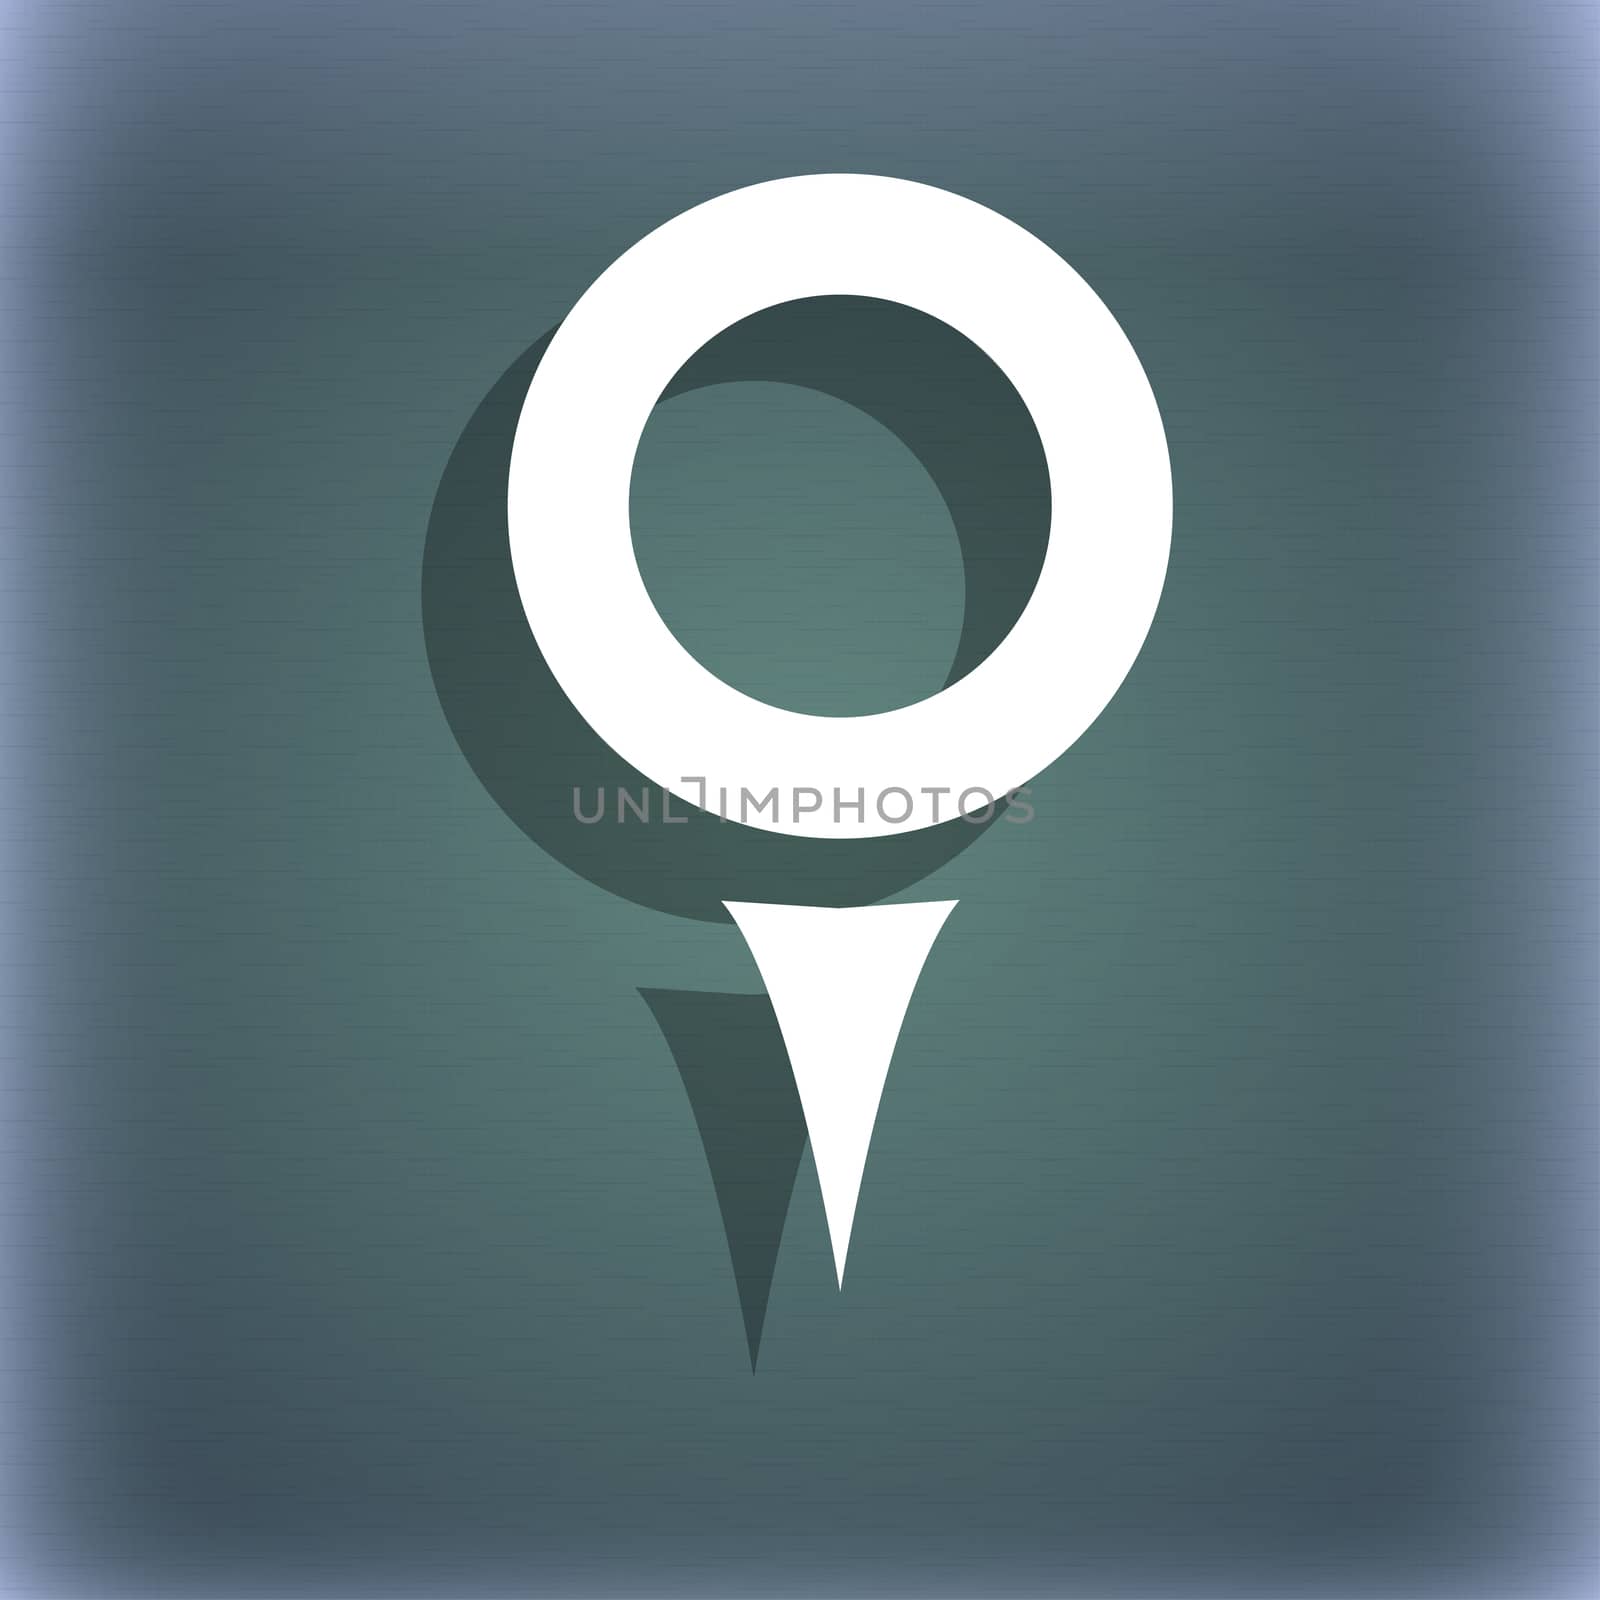 Map pointer, GPS location icon symbol on the blue-green abstract background with shadow and space for your text. illustration